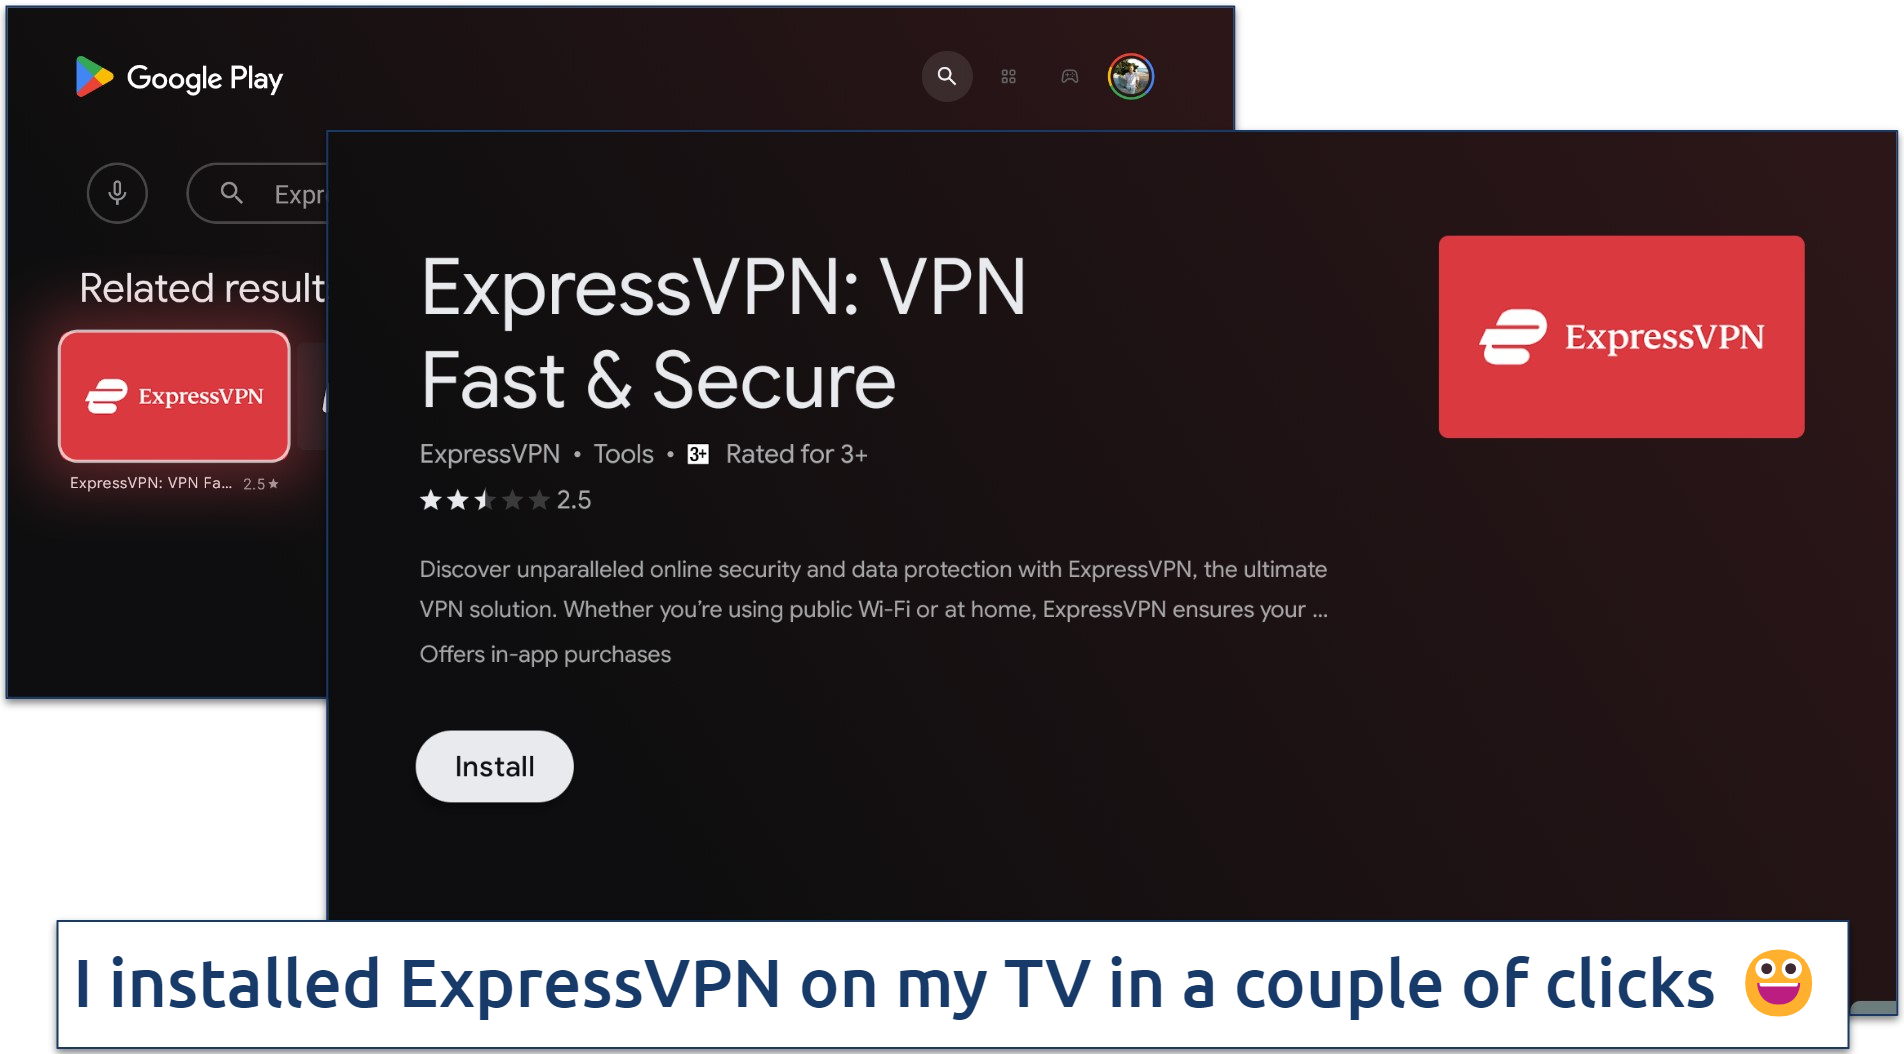 Screenshot of ExpressVPN's smart TV app in Google Play Store for Android TV